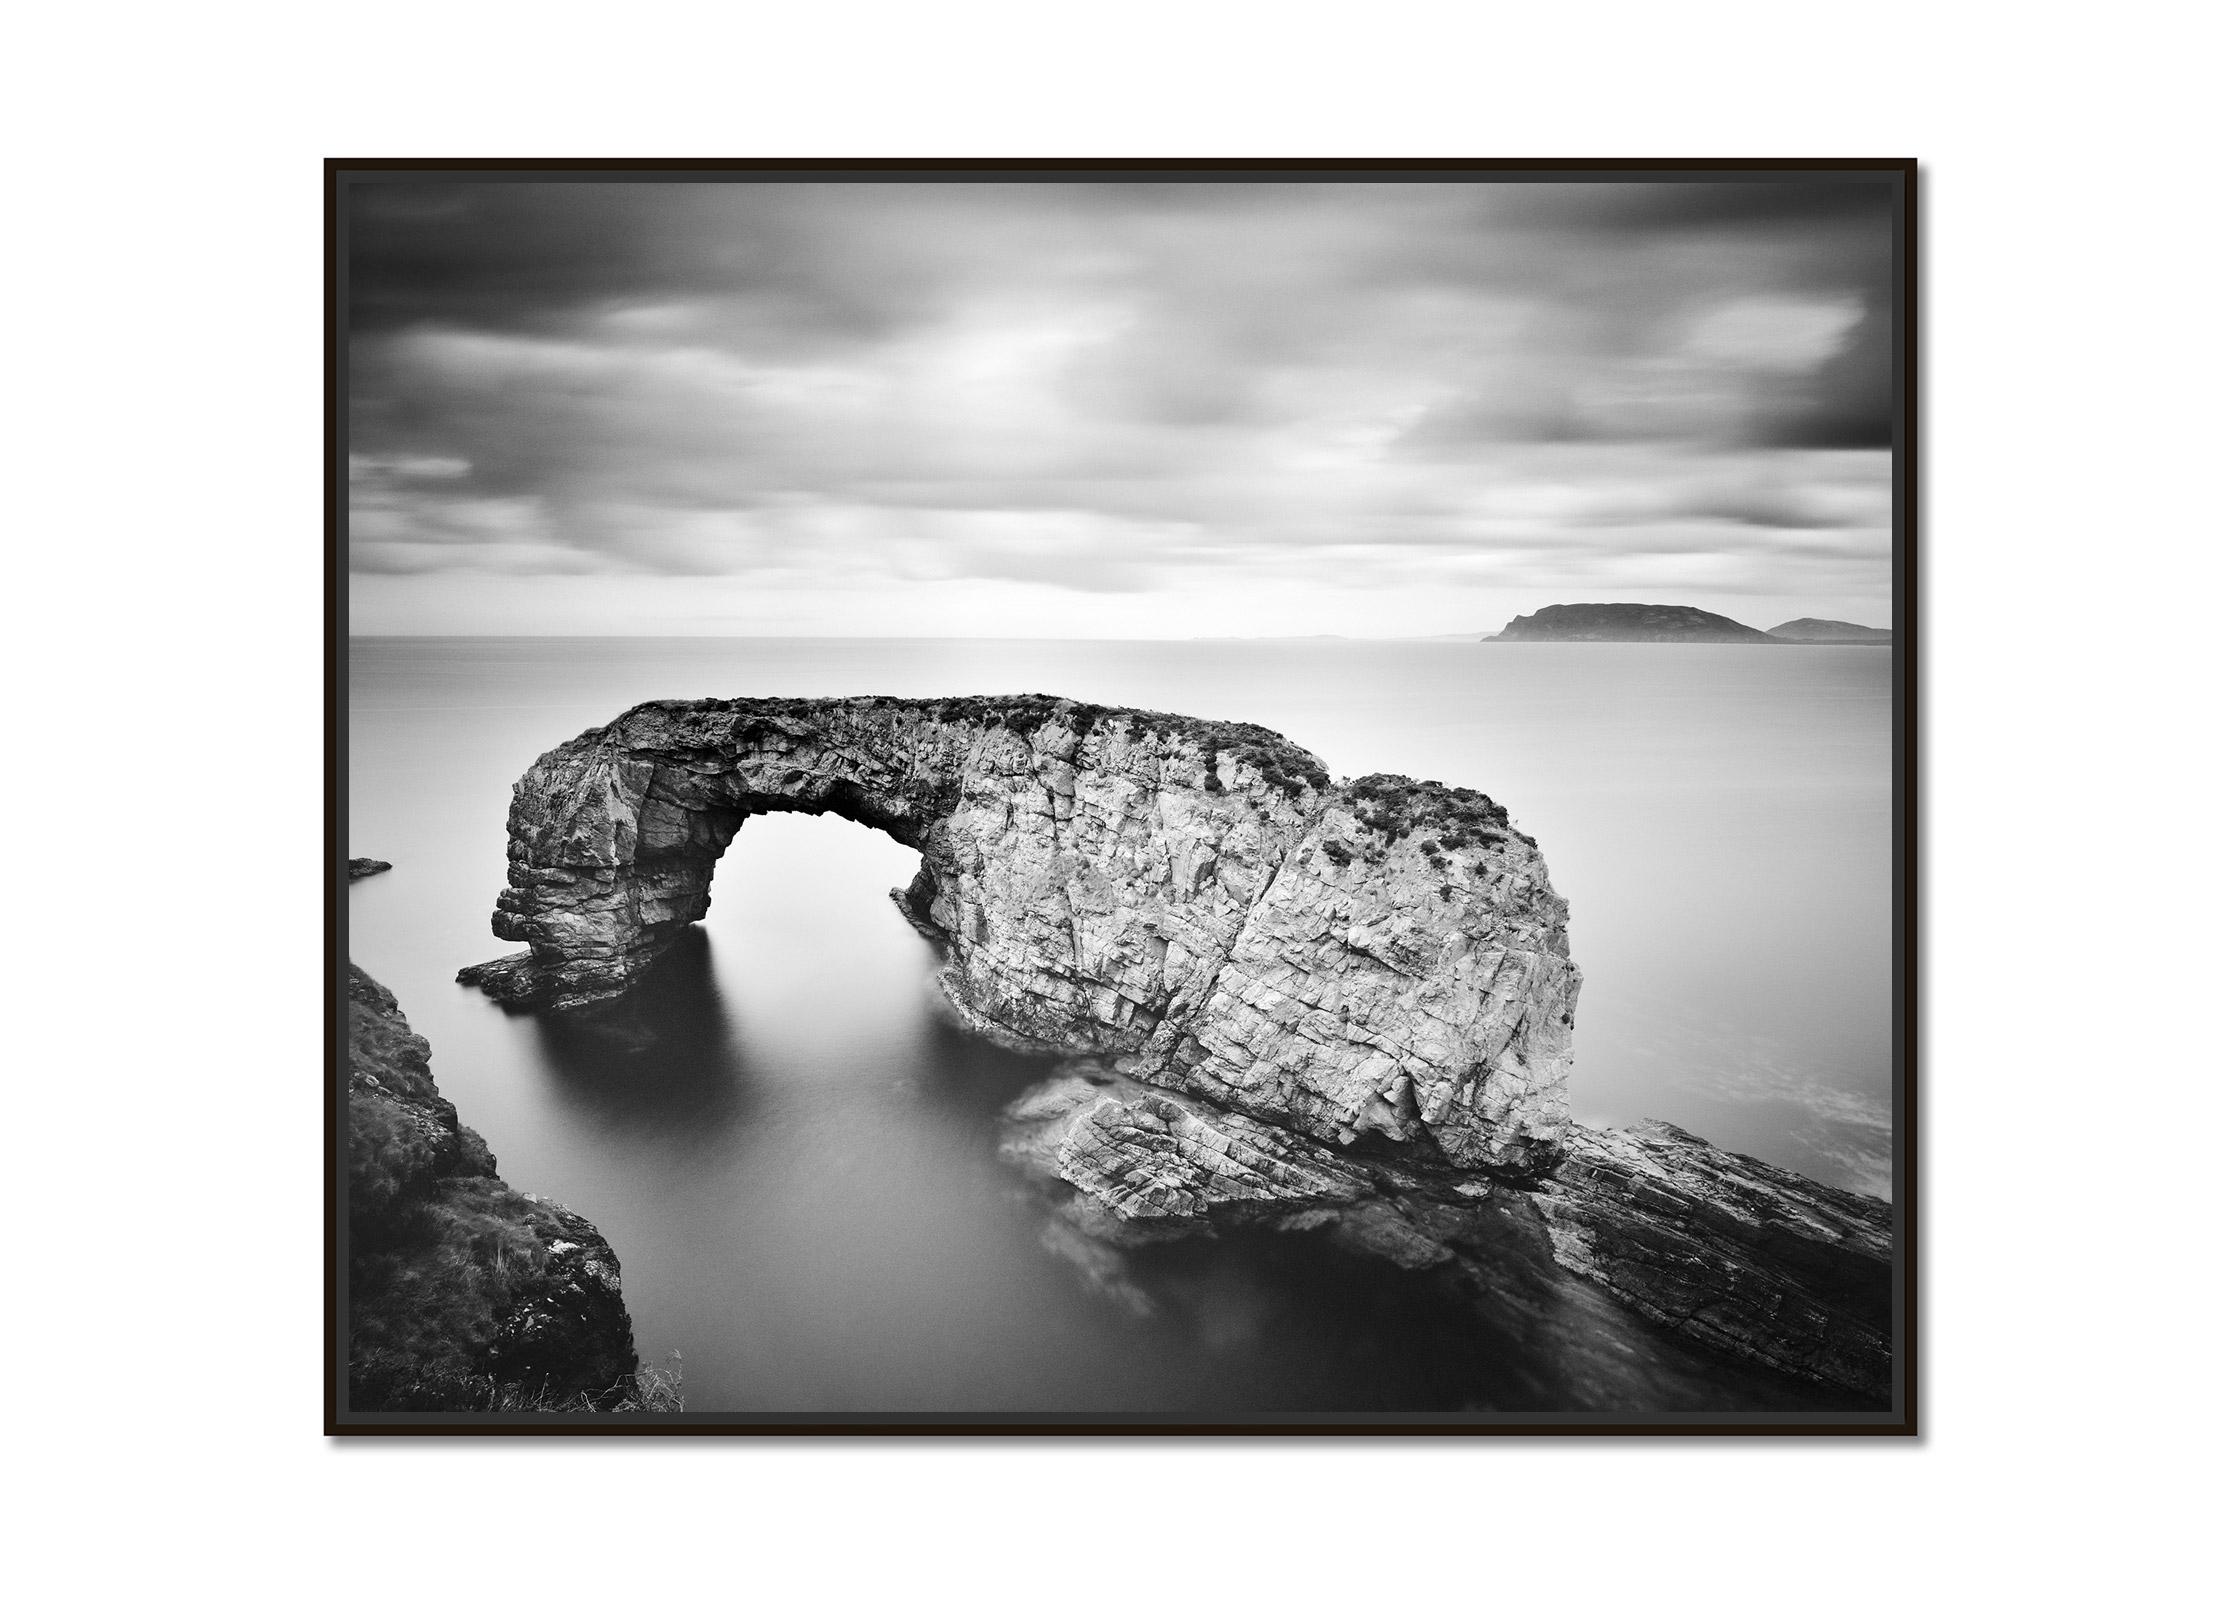 Great Pollet Sea Arch, Ireland, black and white photography, fine art landscape - Photograph by Gerald Berghammer